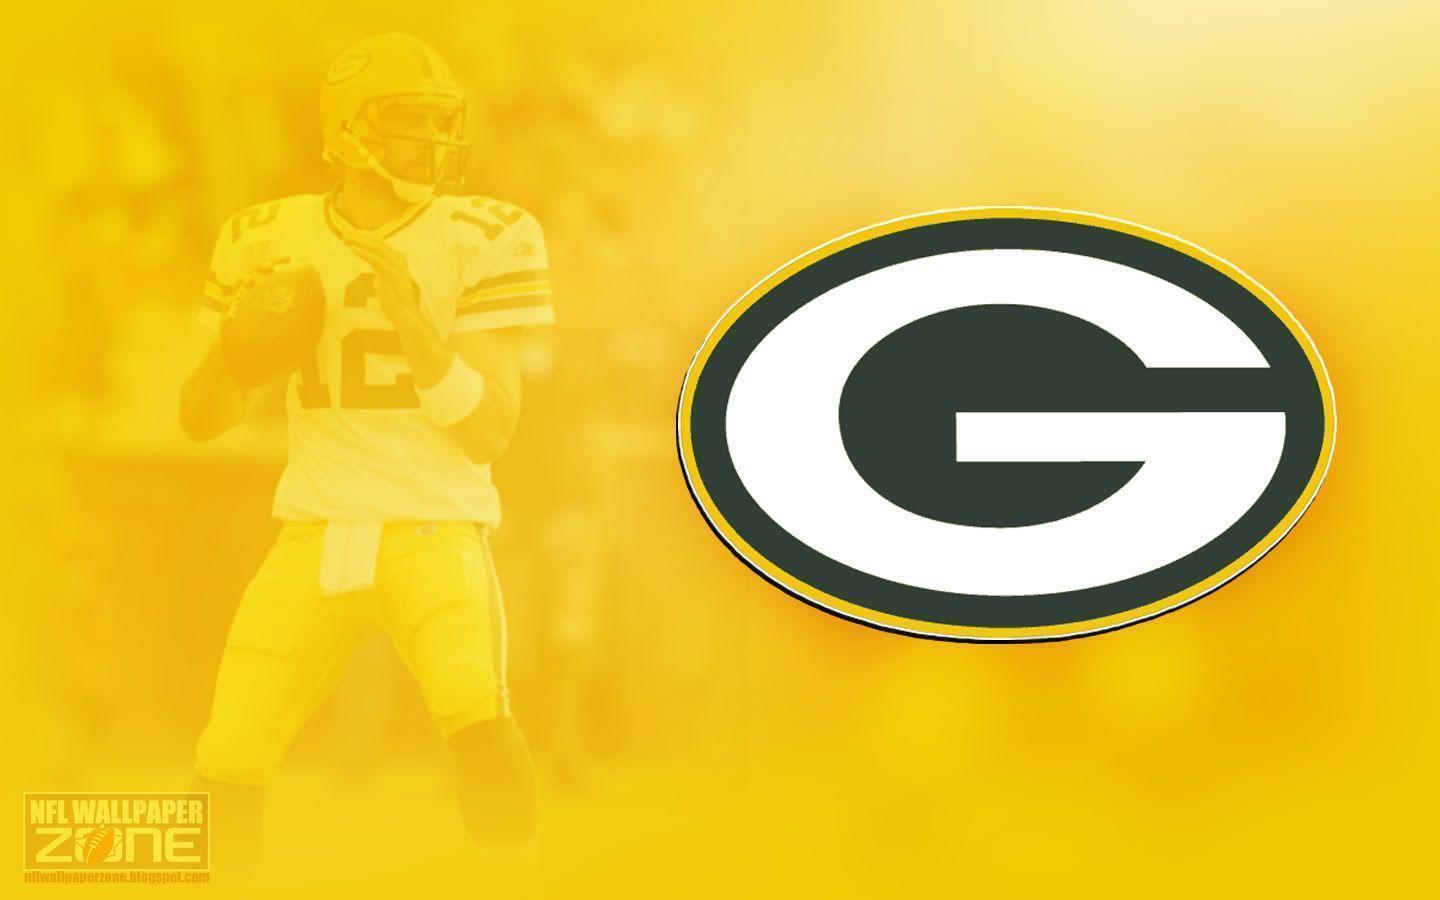 Green Bay Packers Picture, Image & Photo